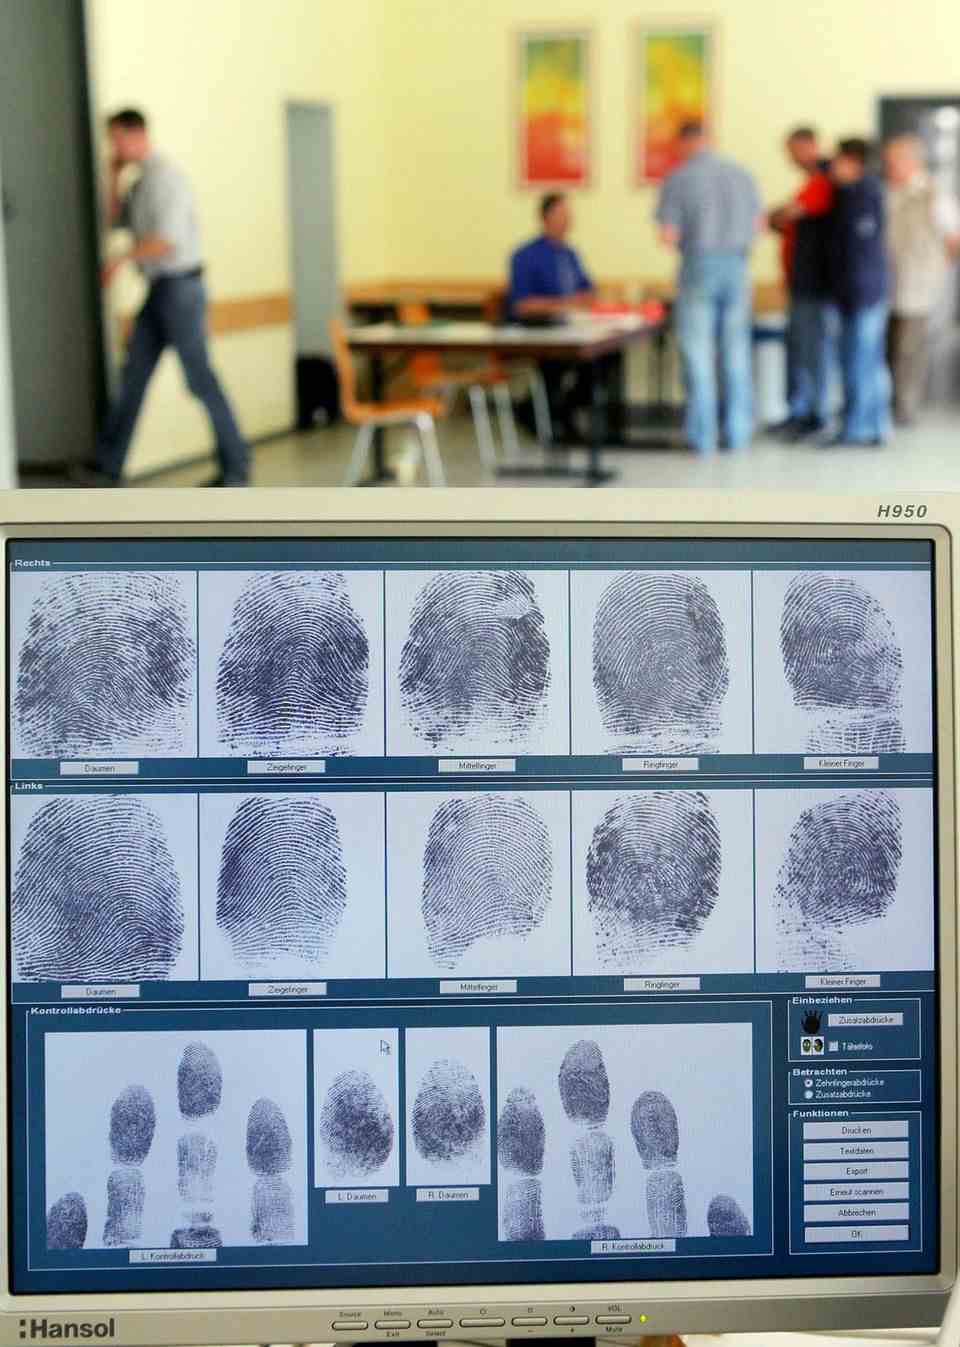 The fingerprints of a man can be seen on a computer screen in Bad Homburg